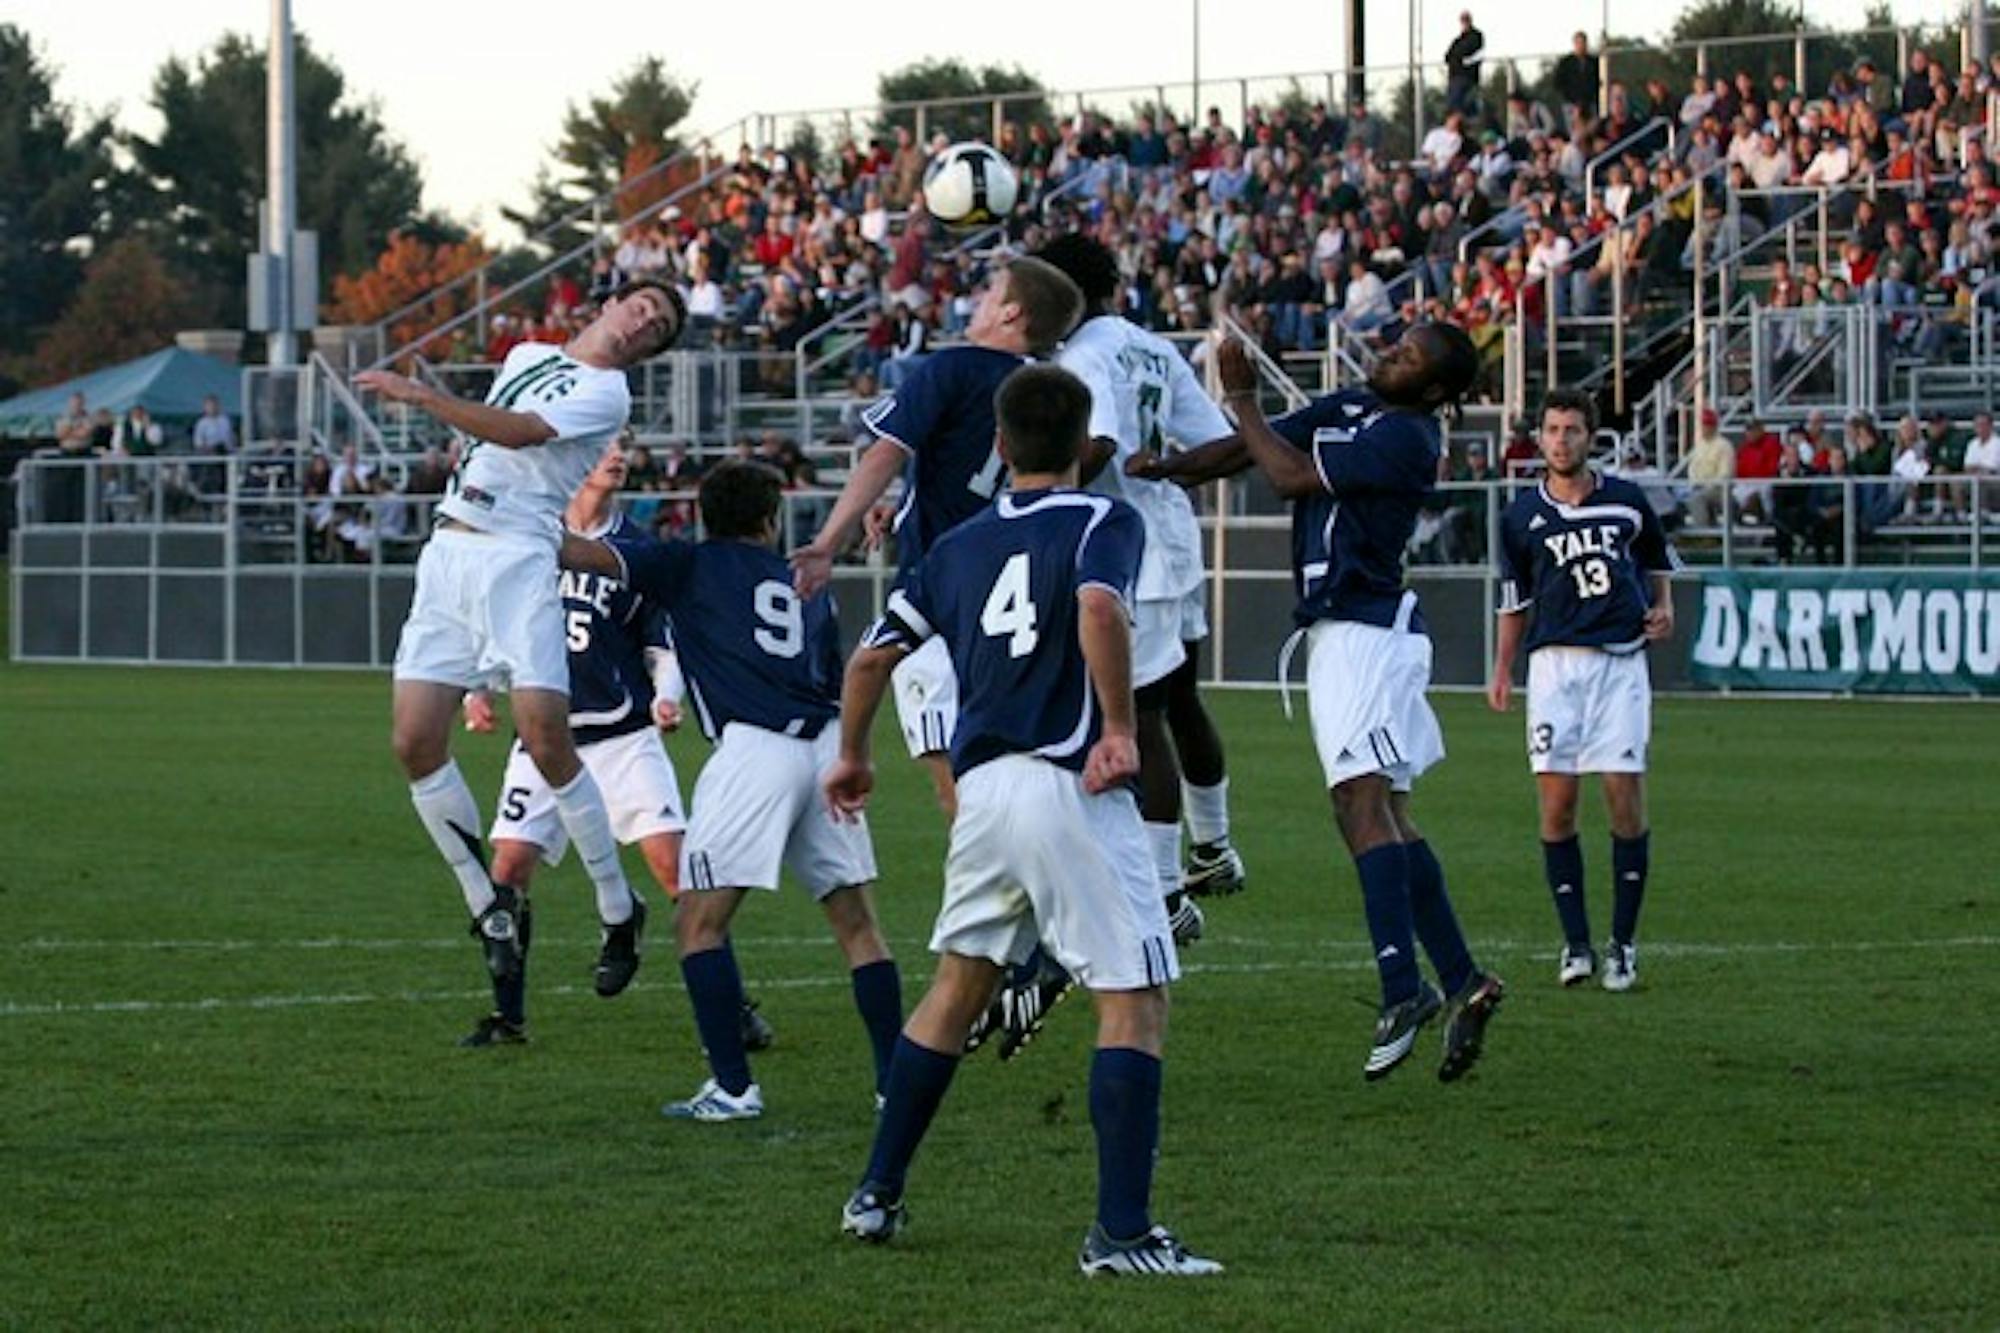  The nationally ranked men's soccer team currently stands at 8-3-1.